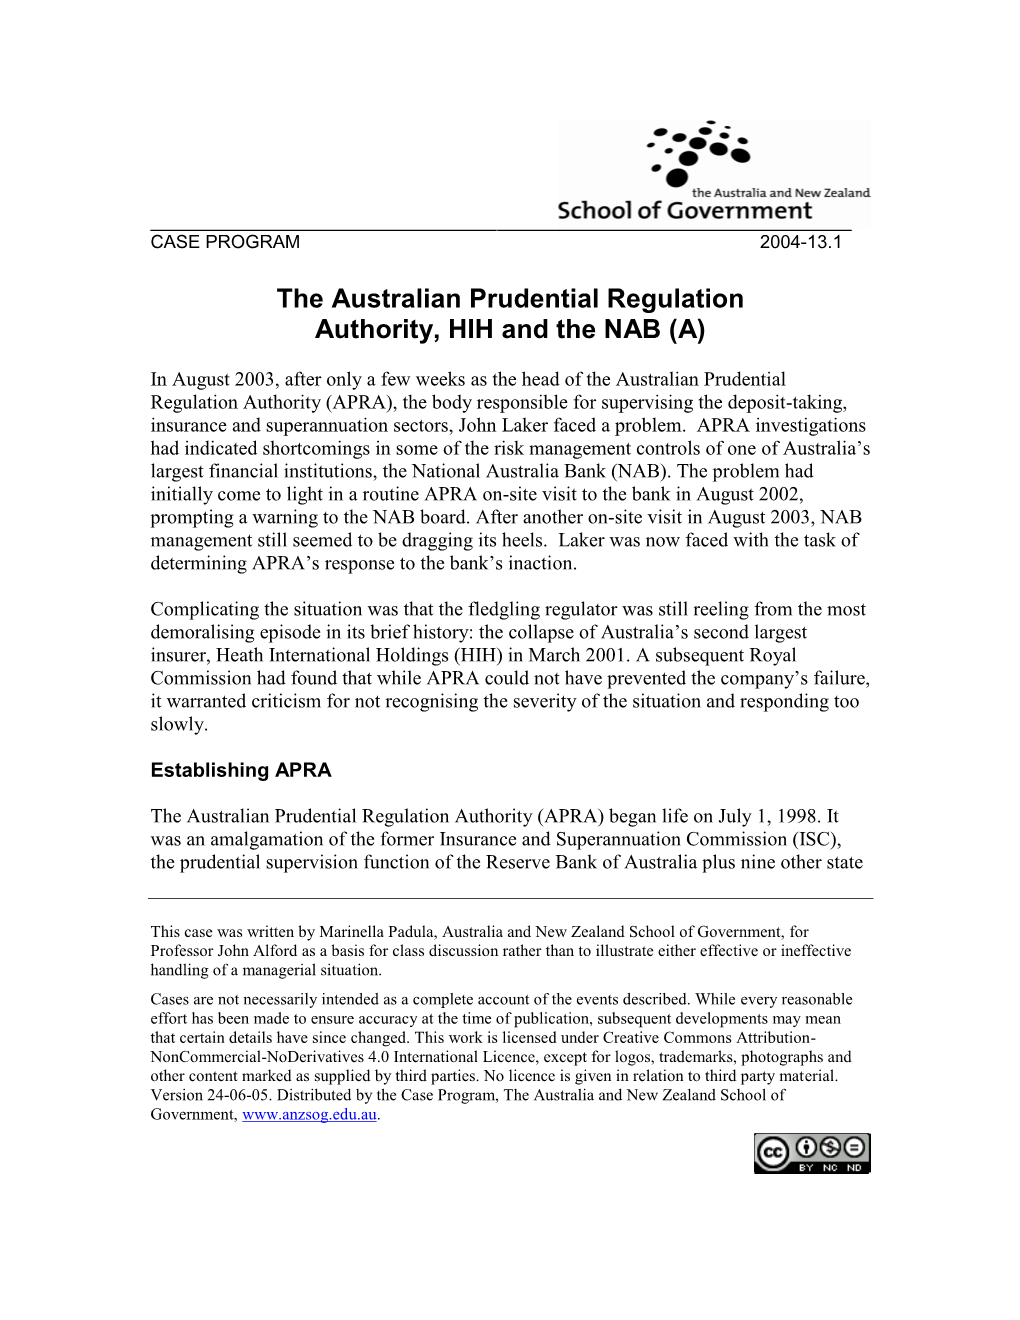 The Australian Prudential Regulation Authority, HIH and the NAB (A)